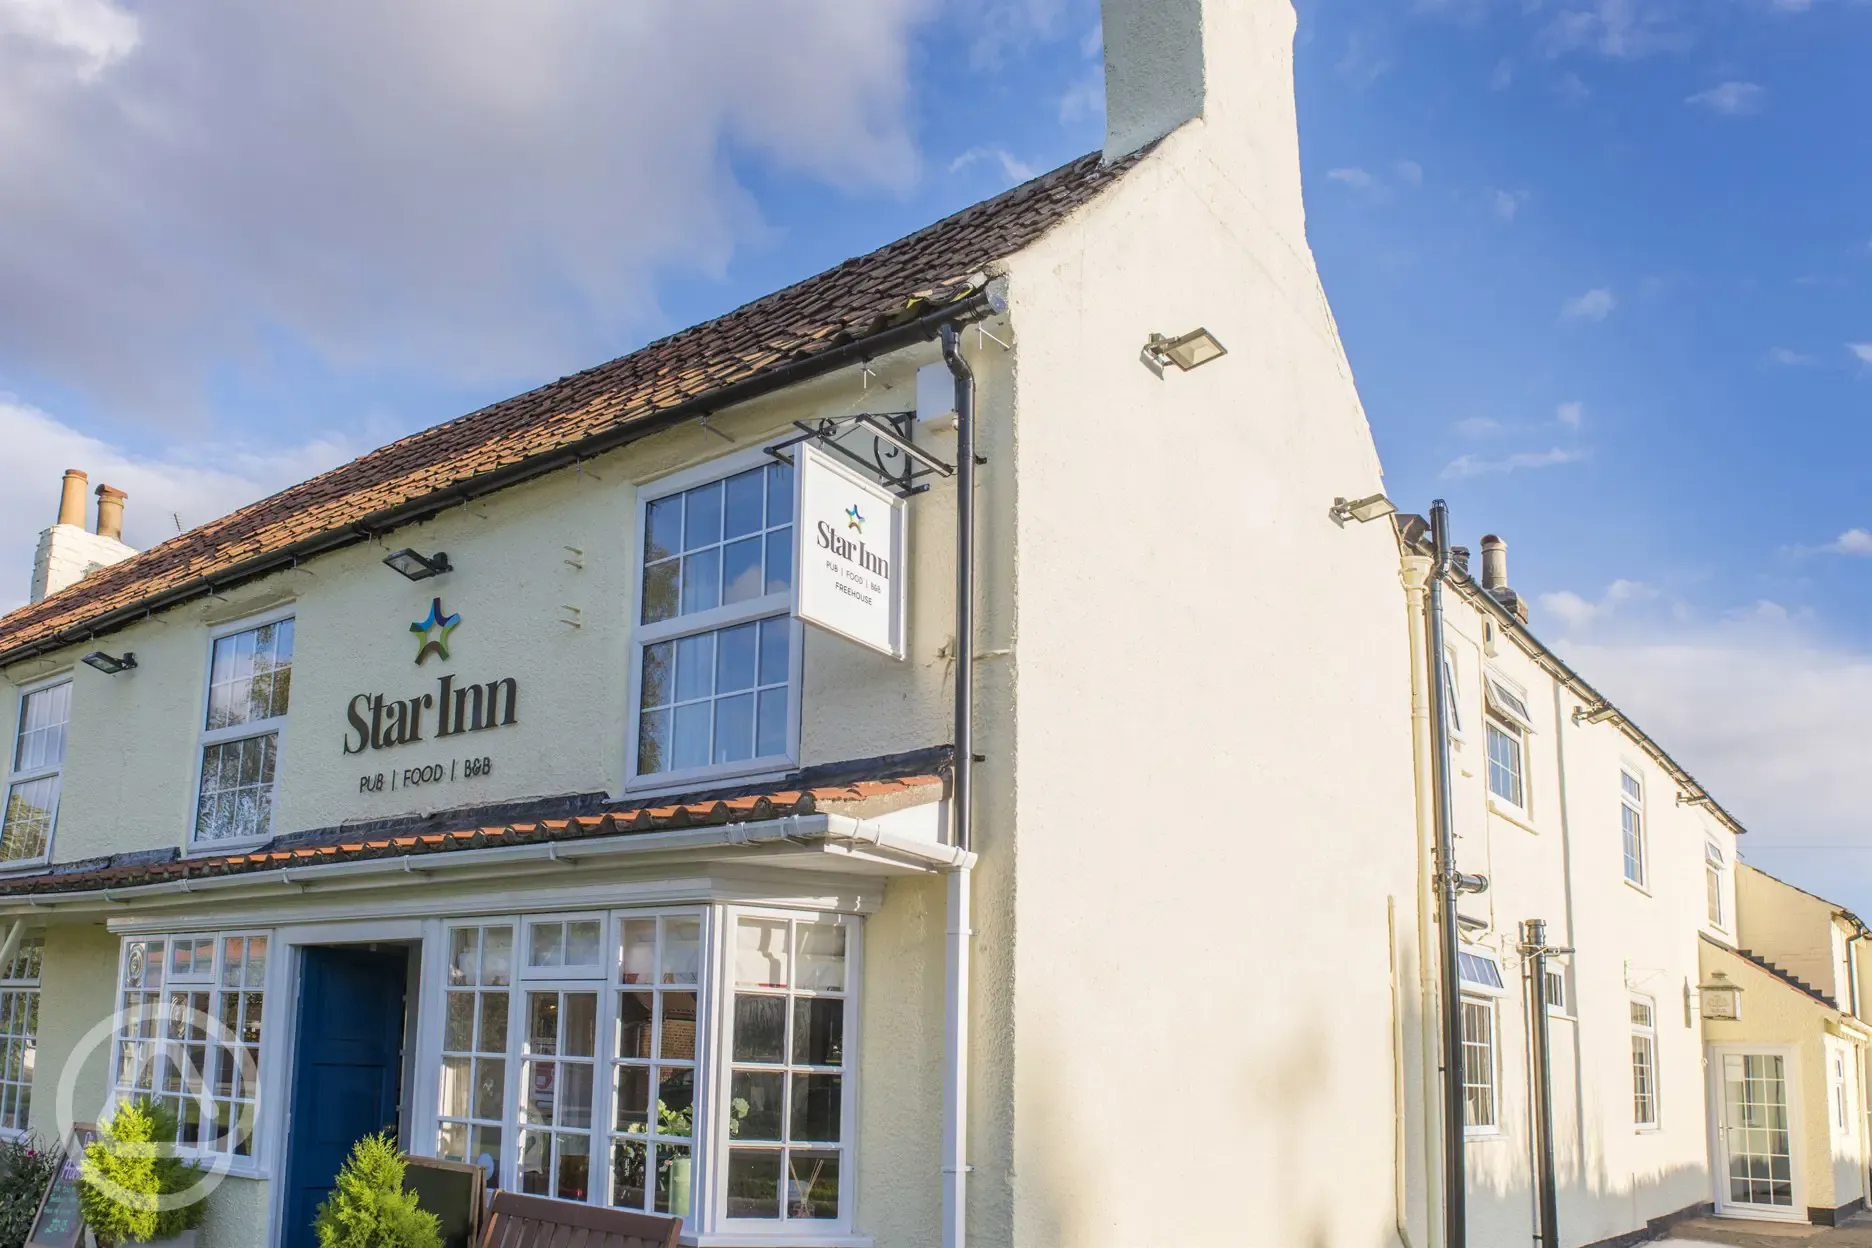 The Star Inn pub just 2 minutes walk from the campsite and is dog friendly